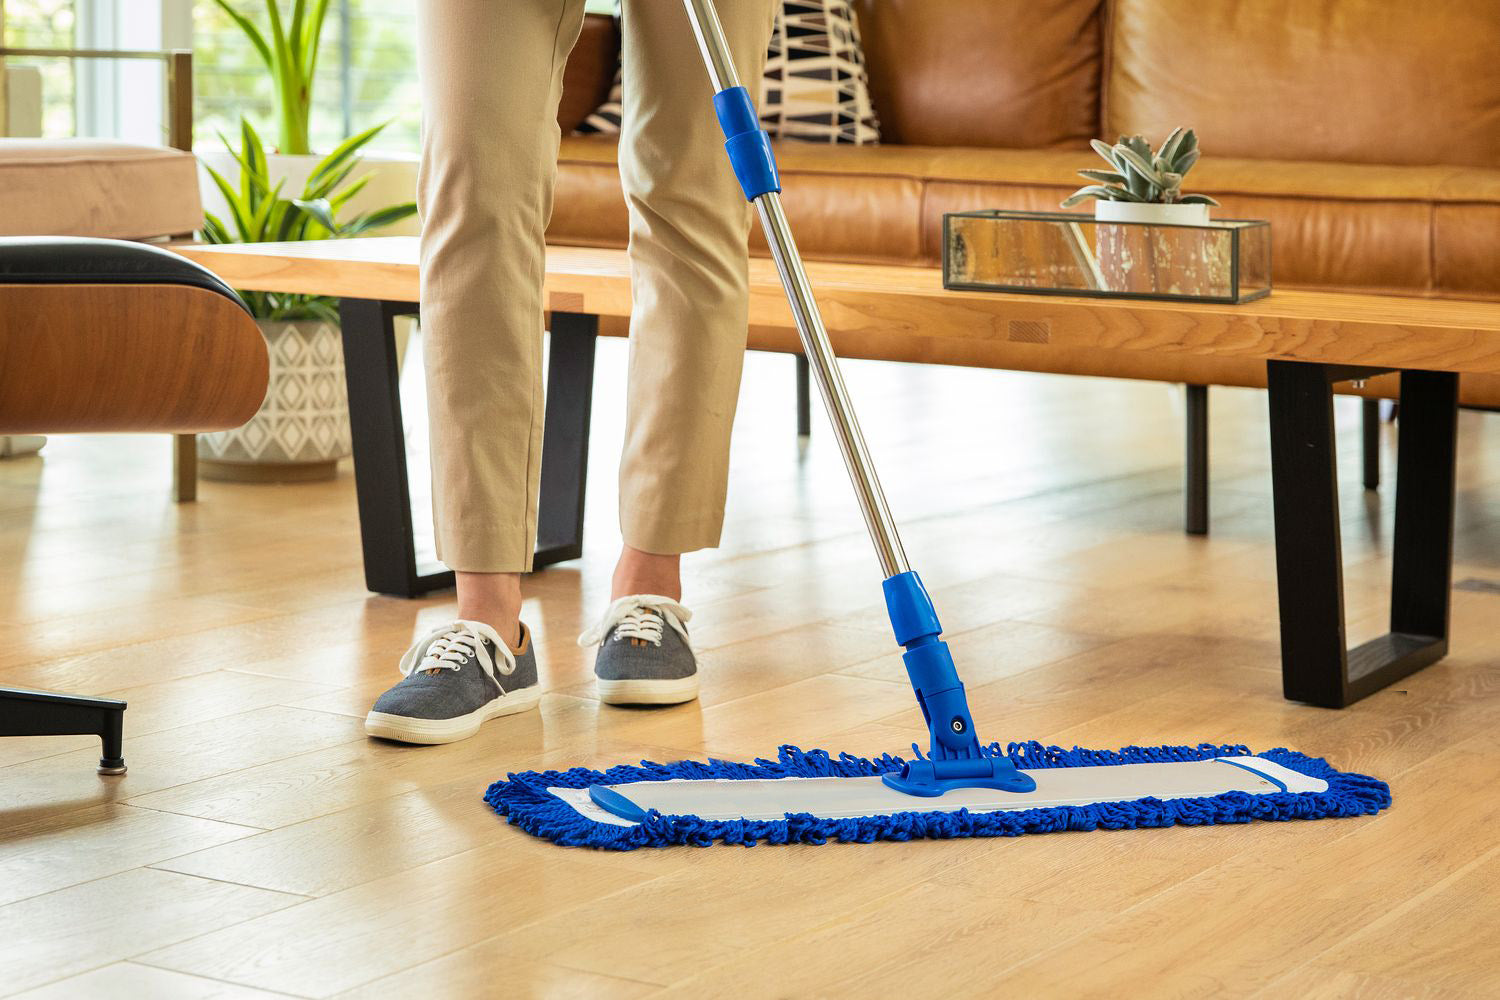 The Microfiber Wholesale Professional Mop, Reviewed